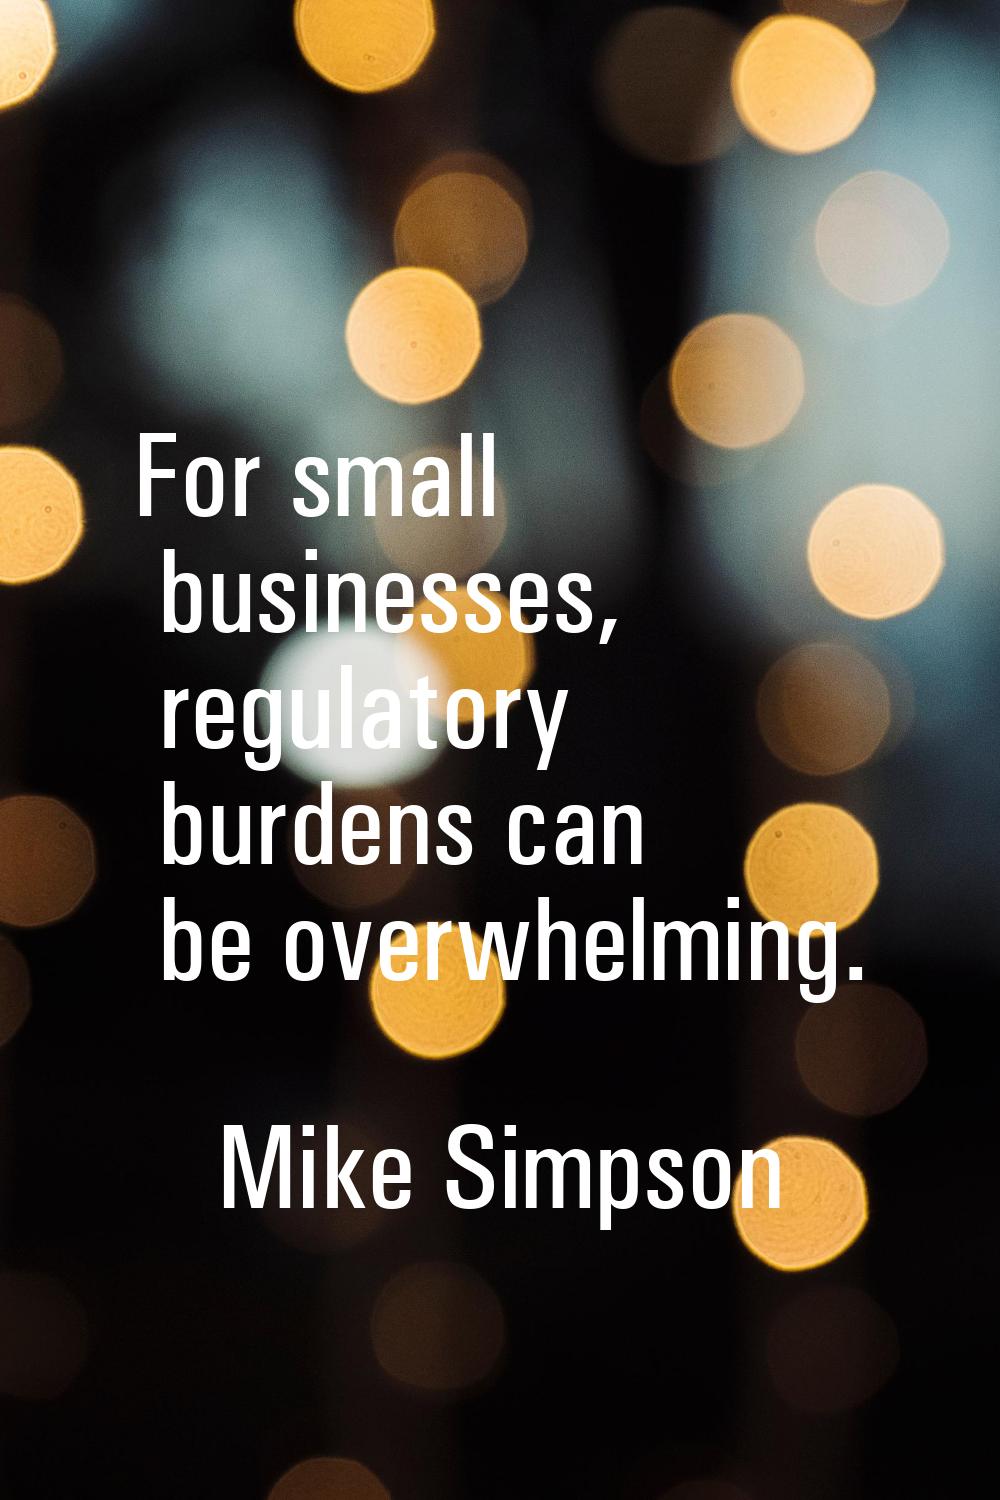 For small businesses, regulatory burdens can be overwhelming.